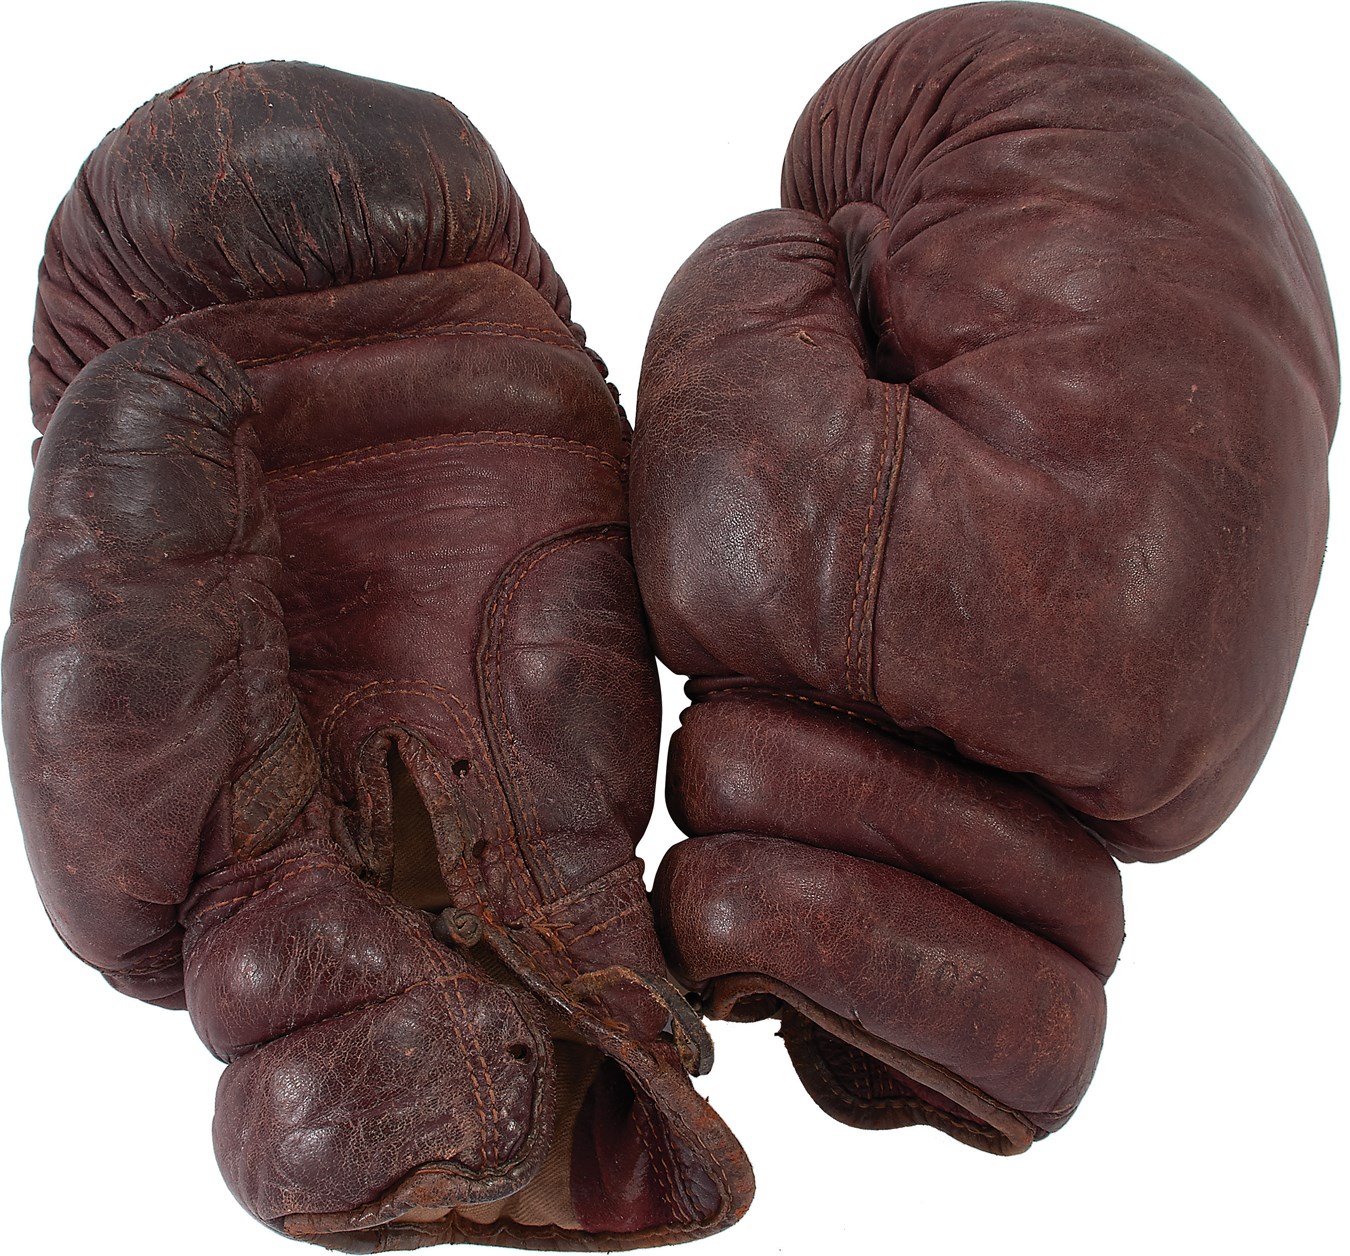 - 1930s Nathan Mann Worn Boxing Gloves and Original Oil Painting - Fought Joe Louis for Title